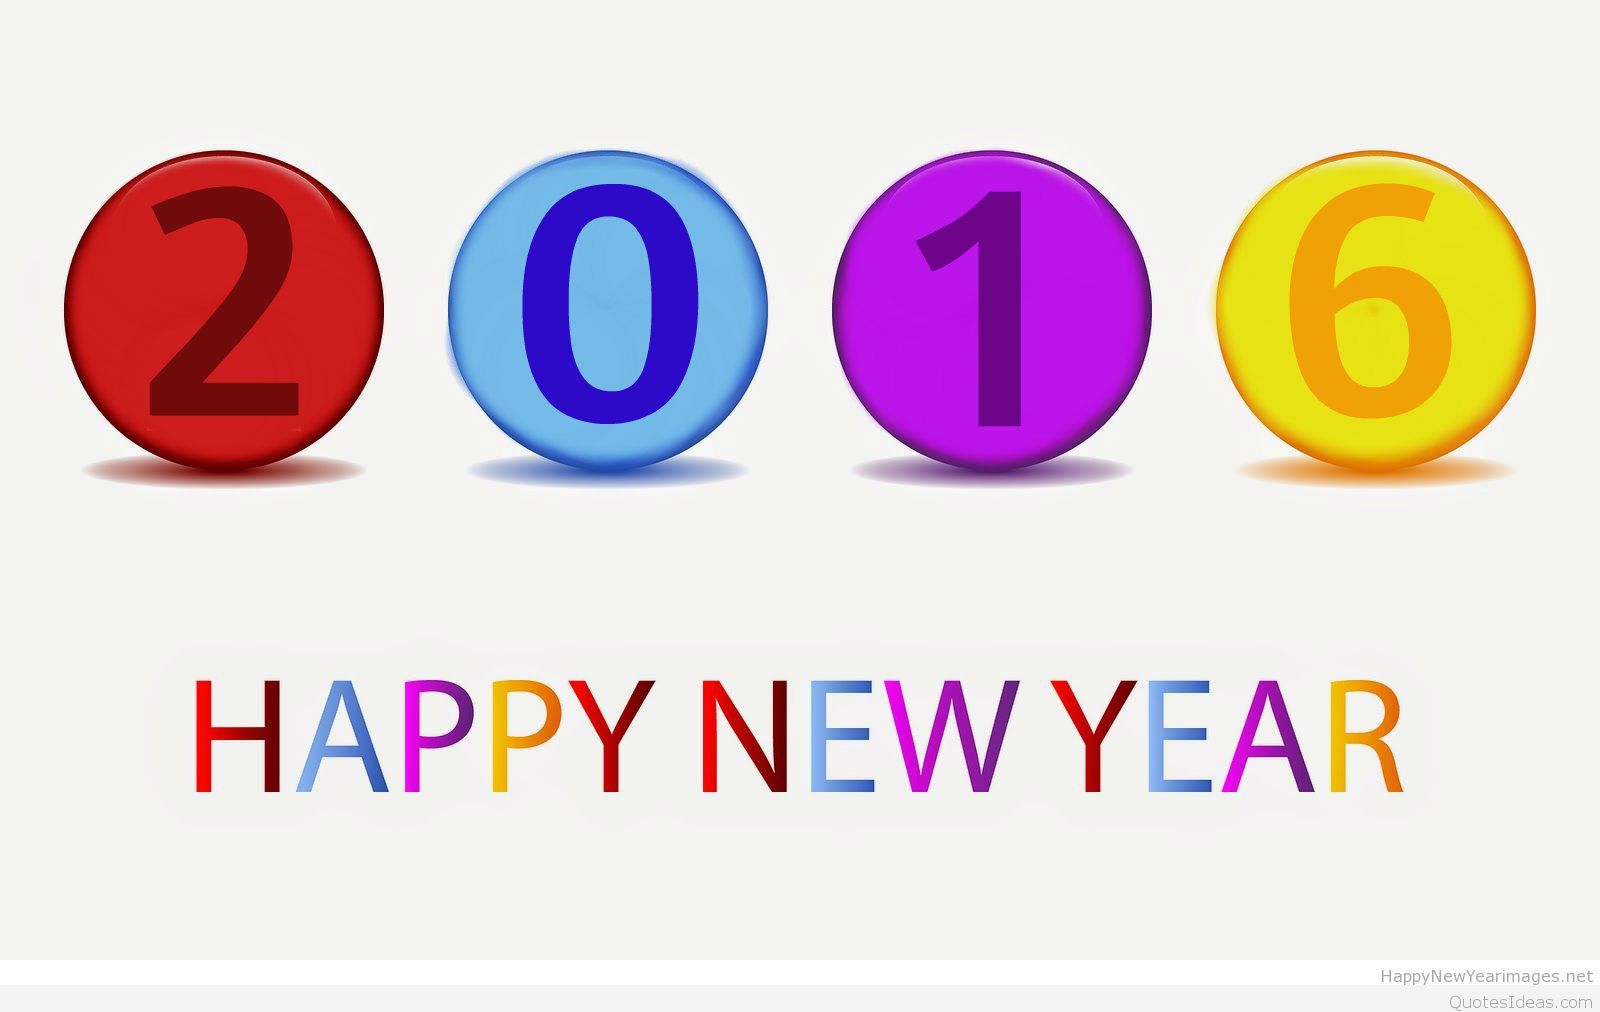 Free clipart images new year - ClipartFox